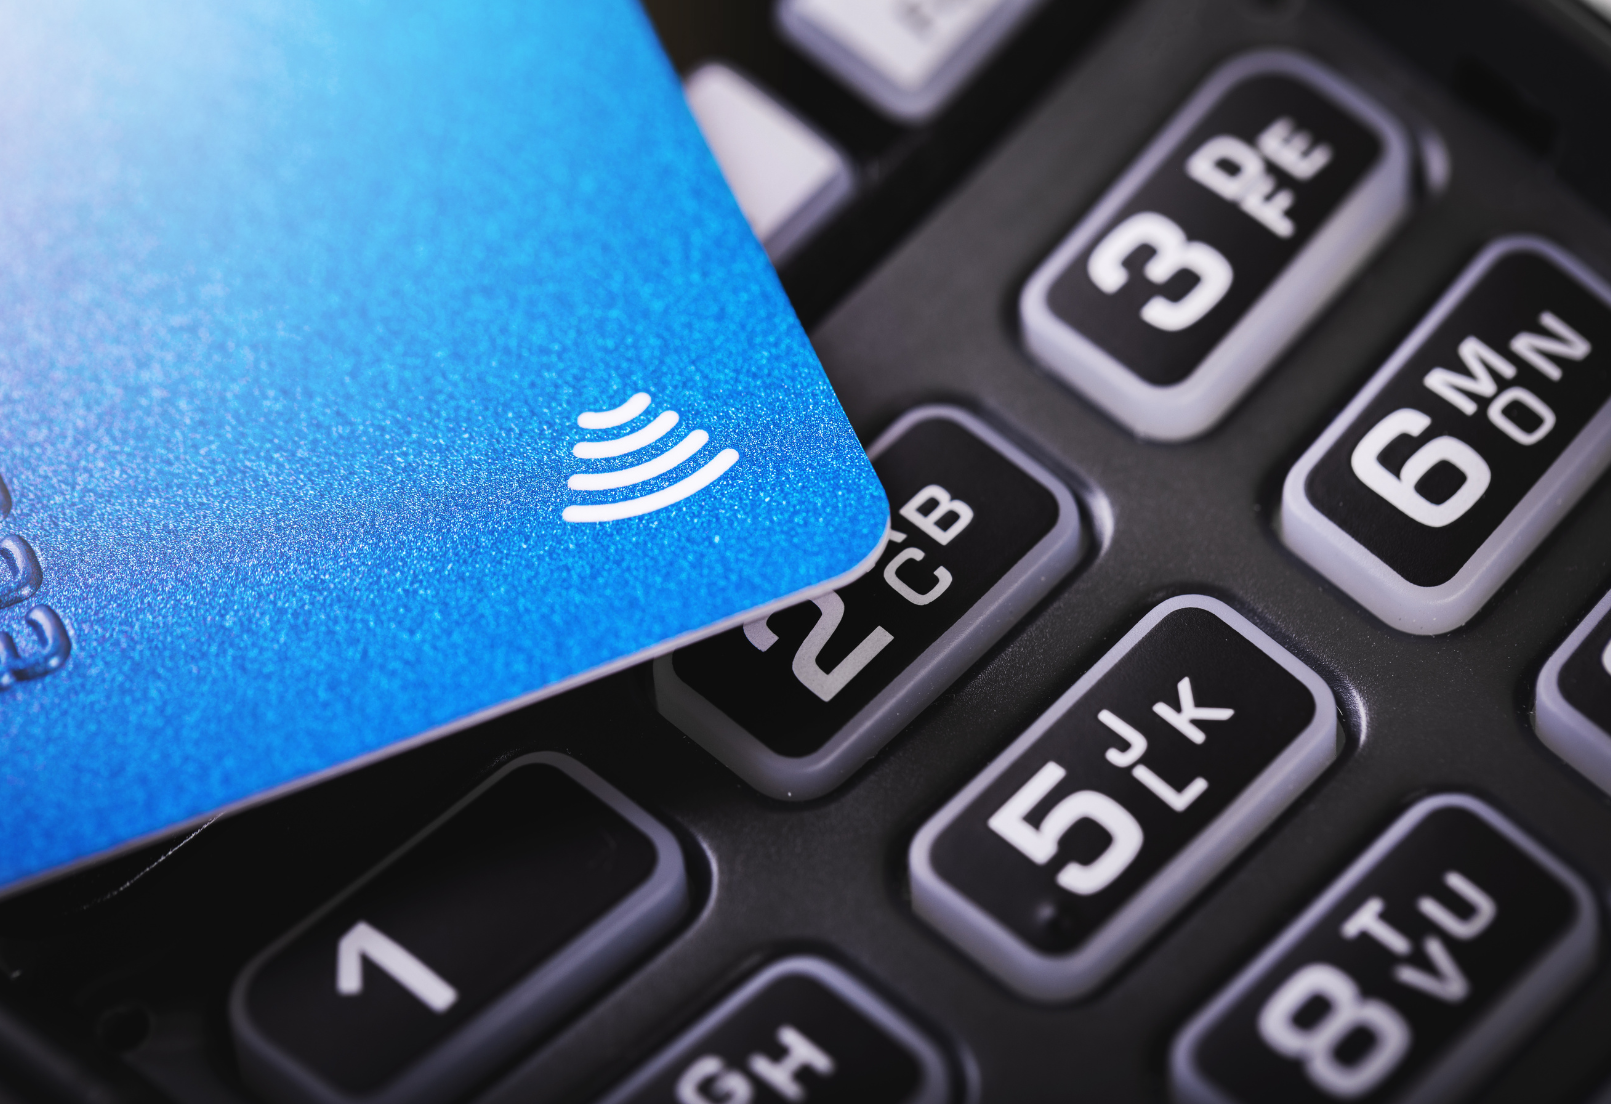 Brief Overview About Contactless Payments